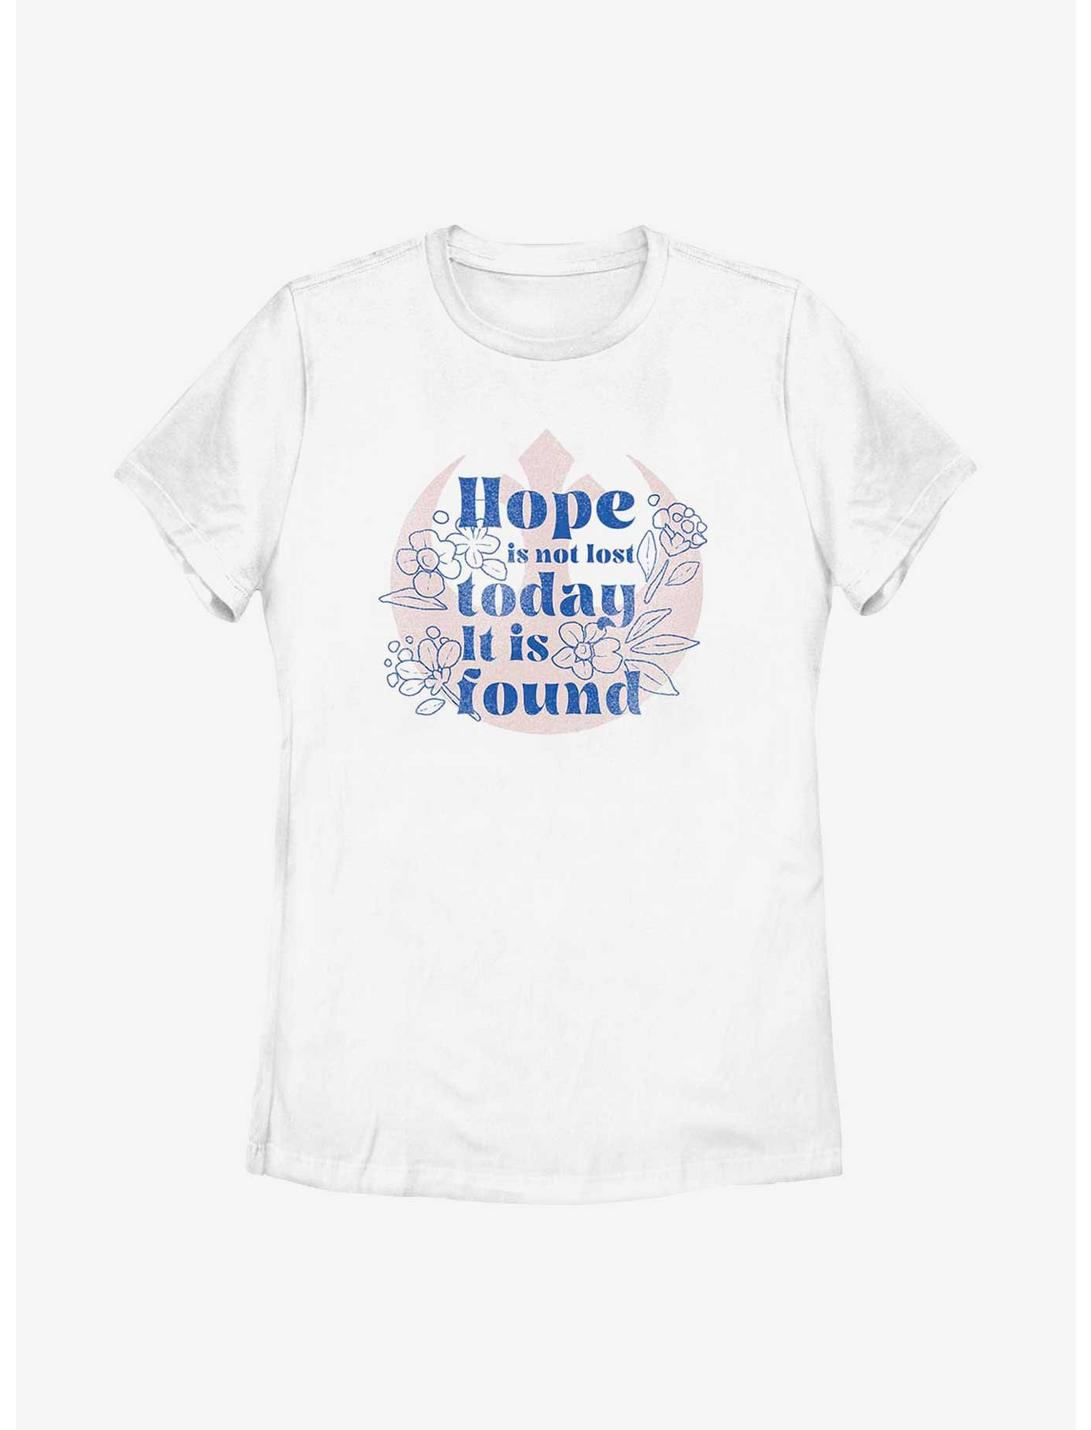 Star Wars Hope Is Not Lost Womens T-Shirt, WHITE, hi-res